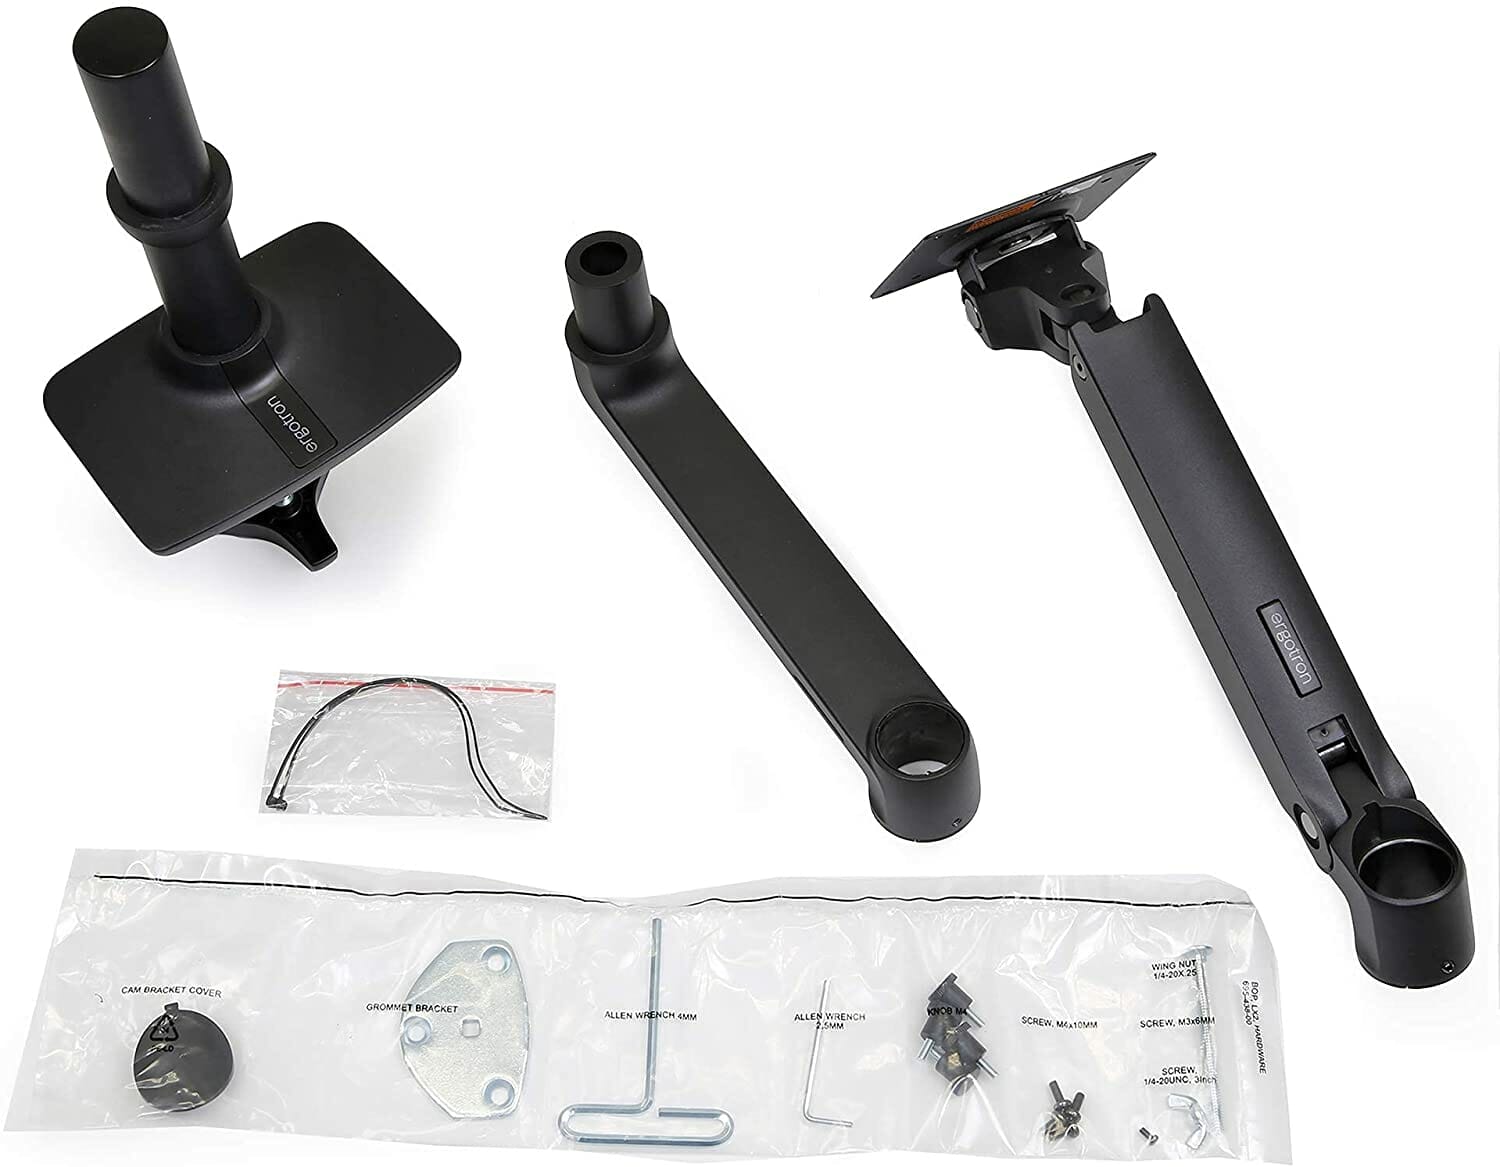 parts of the monitor arm